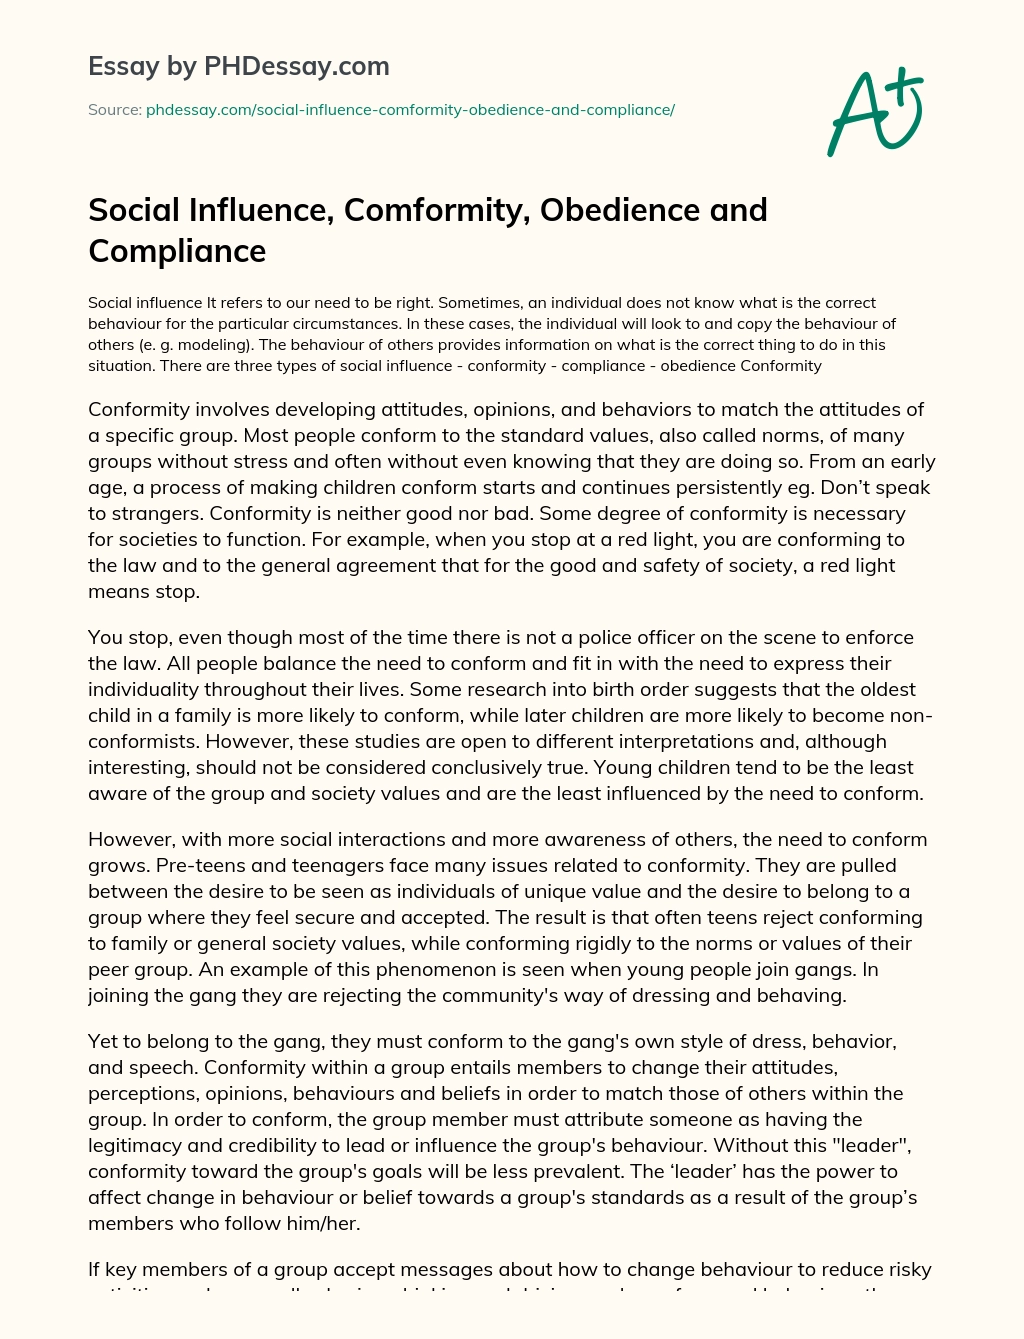 Social Influence, Comformity, Obedience and Compliance essay